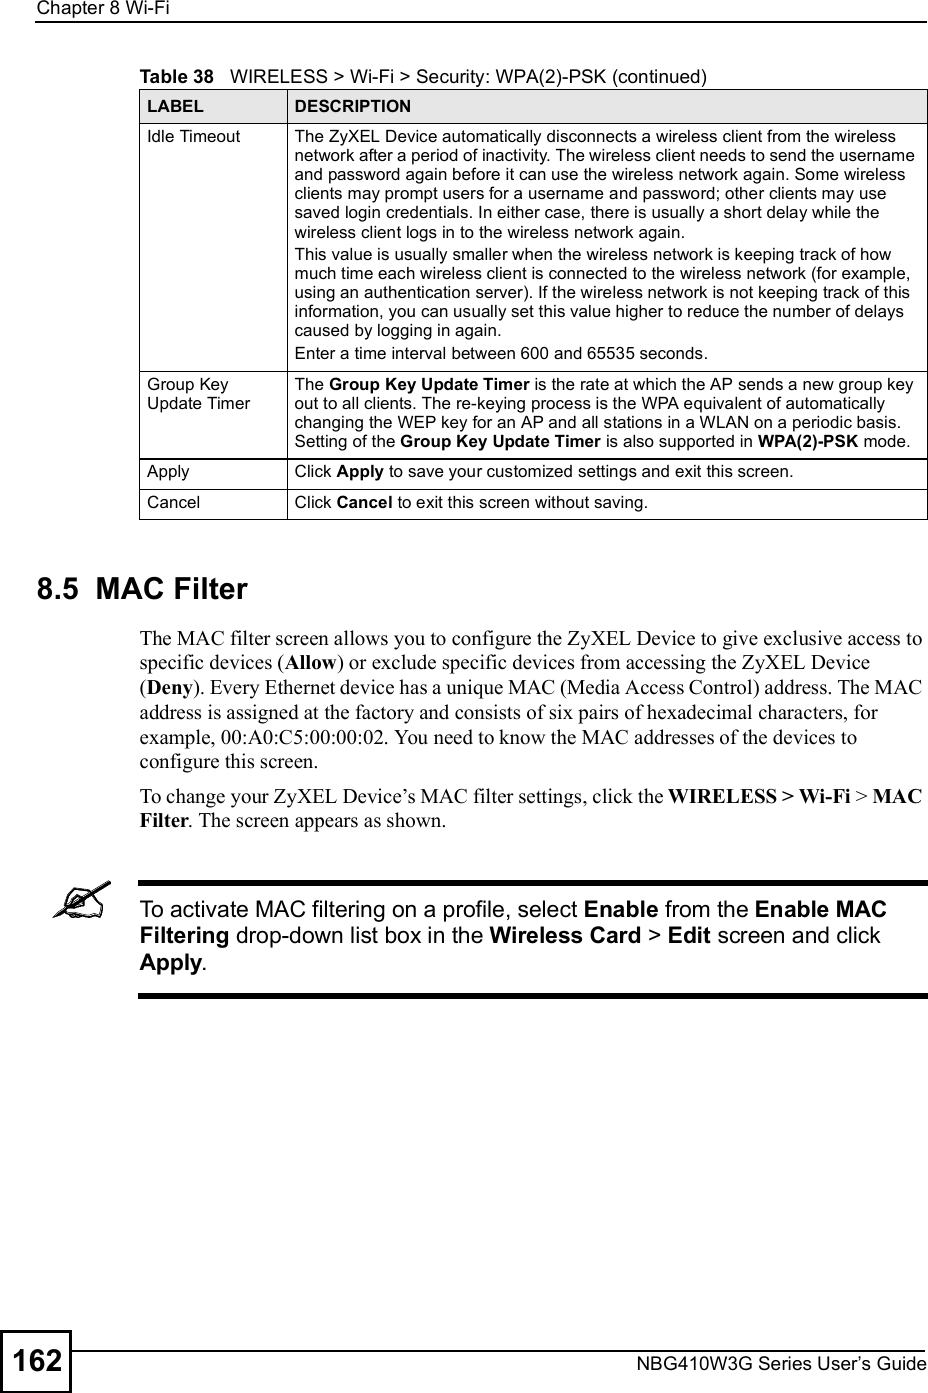 Chapter 8Wi-FiNBG410W3G Series User s Guide1628.5  MAC Filter The MAC filter screen allows you to configure the ZyXEL Device to give exclusive access to specific devices (Allow) or exclude specific devices from accessing the ZyXEL Device (Deny). Every Ethernet device has a unique MAC (Media Access Control) address. The MAC address is assigned at the factory and consists of six pairs of hexadecimal characters, for example, 00:A0:C5:00:00:02. You need to know the MAC addresses of the devices to configure this screen.To change your ZyXEL Device!s MAC filter settings, click the WIRELESS &gt; Wi-Fi &gt; MAC Filter. The screen appears as shown.To activate MAC filtering on a profile, select Enable from the Enable MAC Filtering drop-down list box in the Wireless Card &gt; Edit screen and click Apply.Idle Timeout The ZyXEL Device automatically disconnects a wireless client from the wireless network after a period of inactivity. The wireless client needs to send the username and password again before it can use the wireless network again. Some wireless clients may prompt users for a username and password; other clients may use saved login credentials. In either case, there is usually a short delay while the wireless client logs in to the wireless network again. This value is usually smaller when the wireless network is keeping track of how much time each wireless client is connected to the wireless network (for example, using an authentication server). If the wireless network is not keeping track of this information, you can usually set this value higher to reduce the number of delays caused by logging in again.Enter a time interval between 600 and 65535 seconds.Group Key Update Timer The Group Key Update Timer is the rate at which the AP sends a new group key out to all clients. The re-keying process is the WPA equivalent of automatically changing the WEP key for an AP and all stations in a WLAN on a periodic basis. Setting of the Group Key Update Timer is also supported in WPA(2)-PSK mode.ApplyClick Apply to save your customized settings and exit this screen.CancelClick Cancel to exit this screen without saving.Table 38   WIRELESS &gt; Wi-Fi &gt; Security: WPA(2)-PSK (continued)LABEL DESCRIPTION